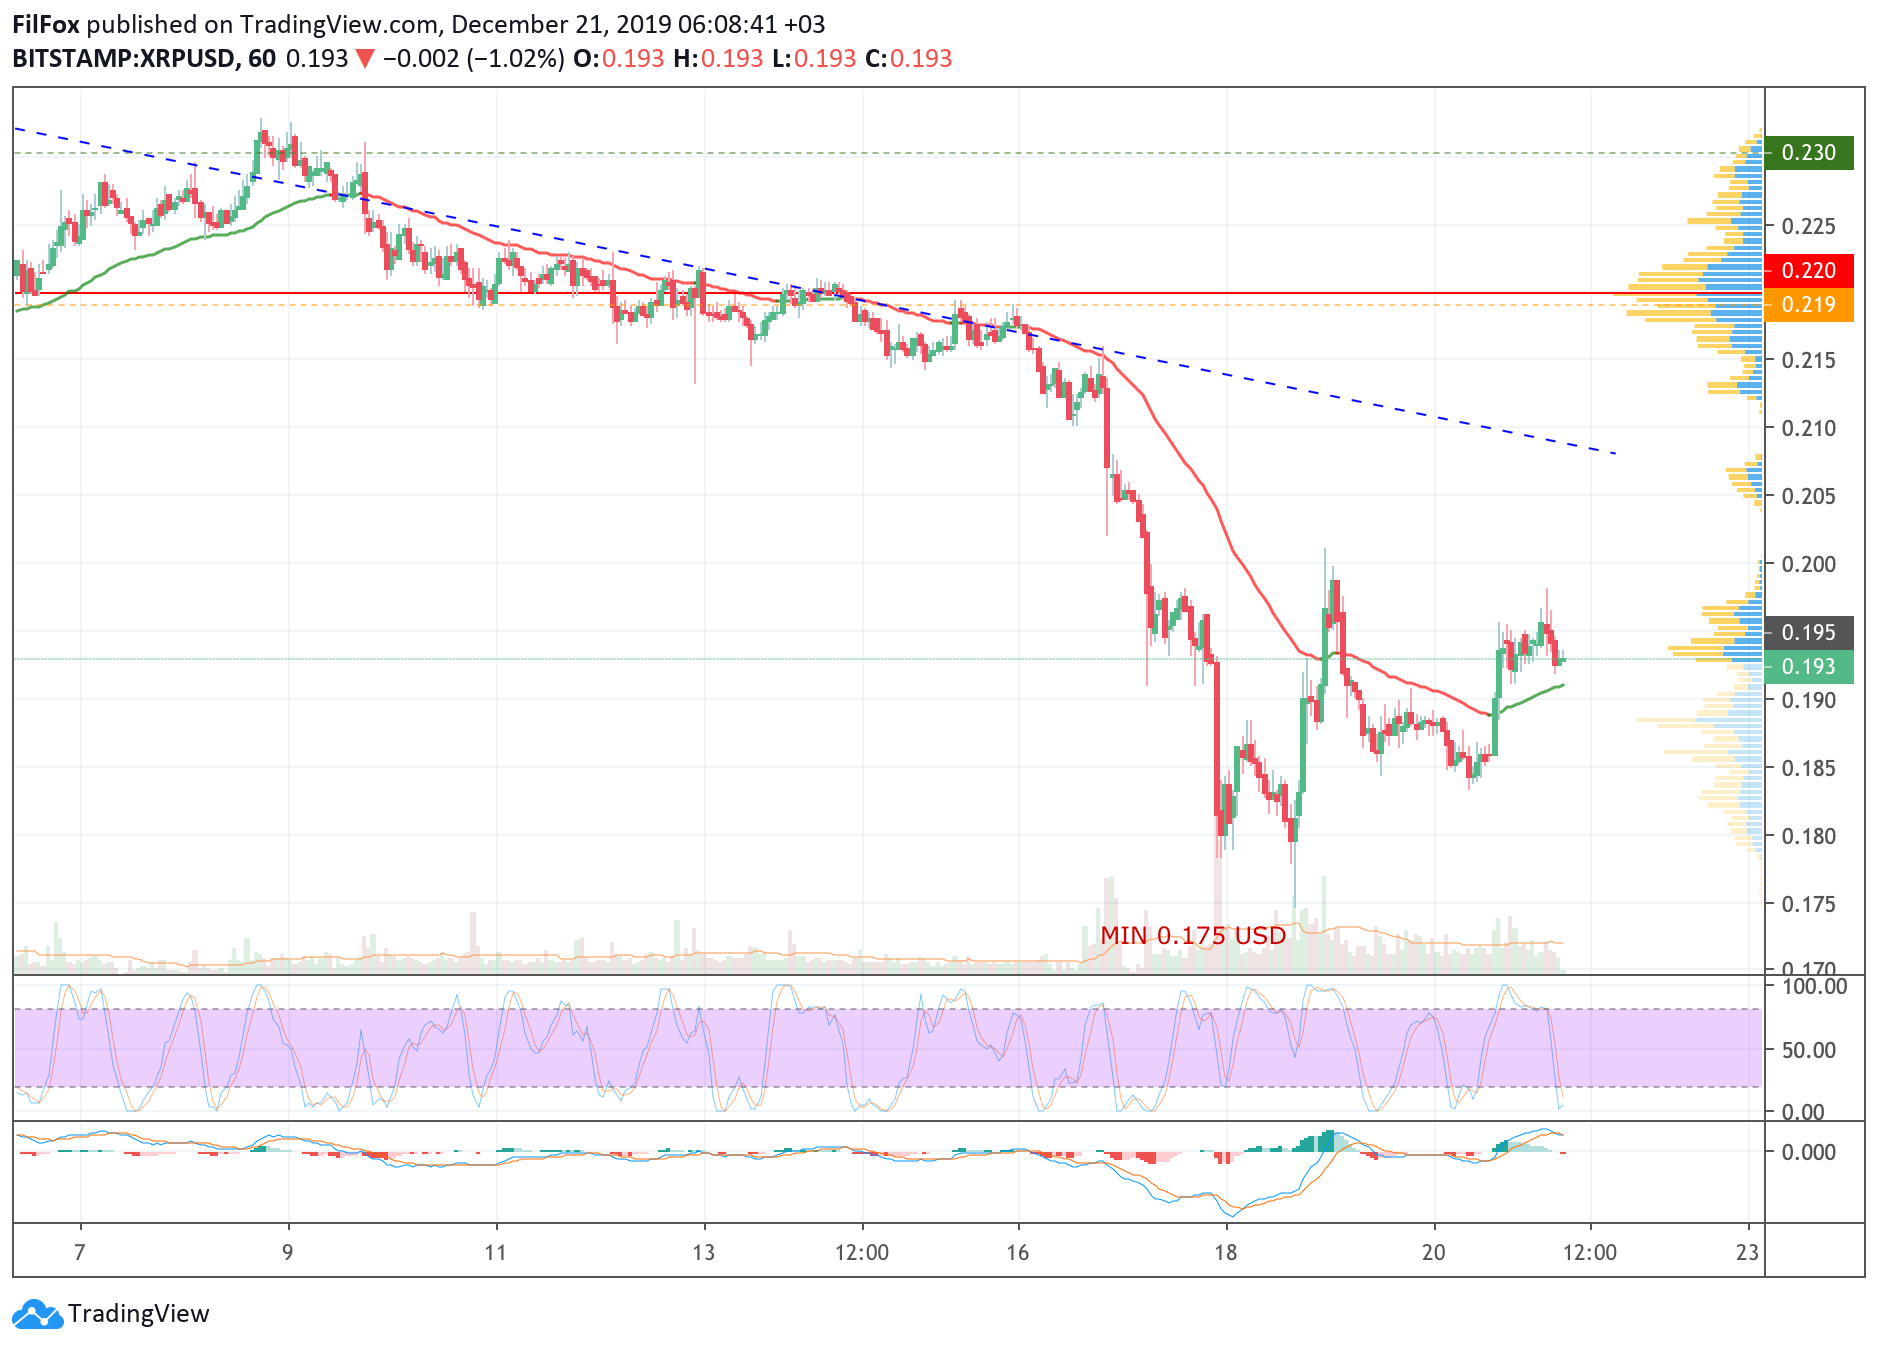 Analysis of cryptocurrency pairs BTC / USD, ETH / USD and XRP / USD on 12/21/2019